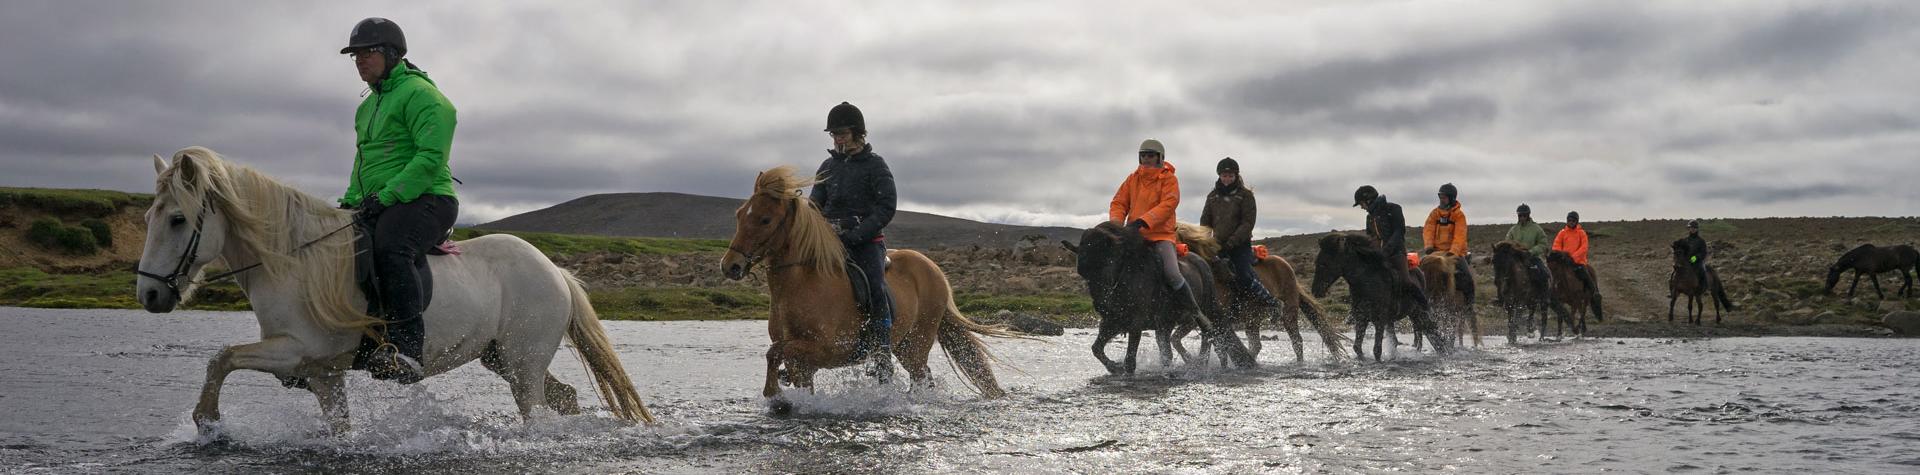 Horse riding in Iceland.